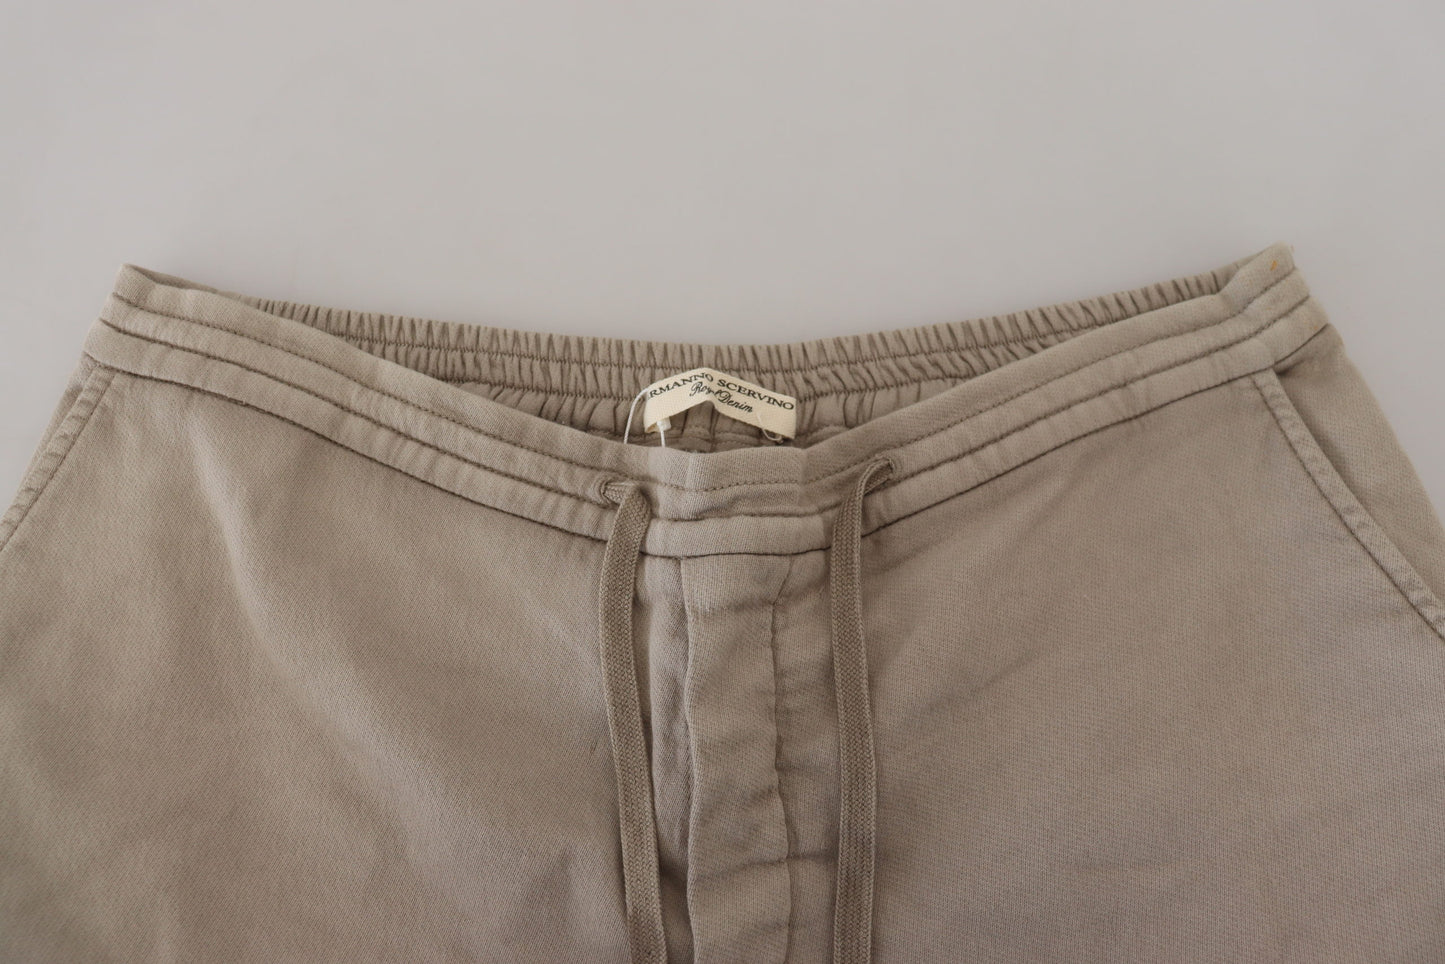 Chic Mid Waist Straight Pants in Light Brown